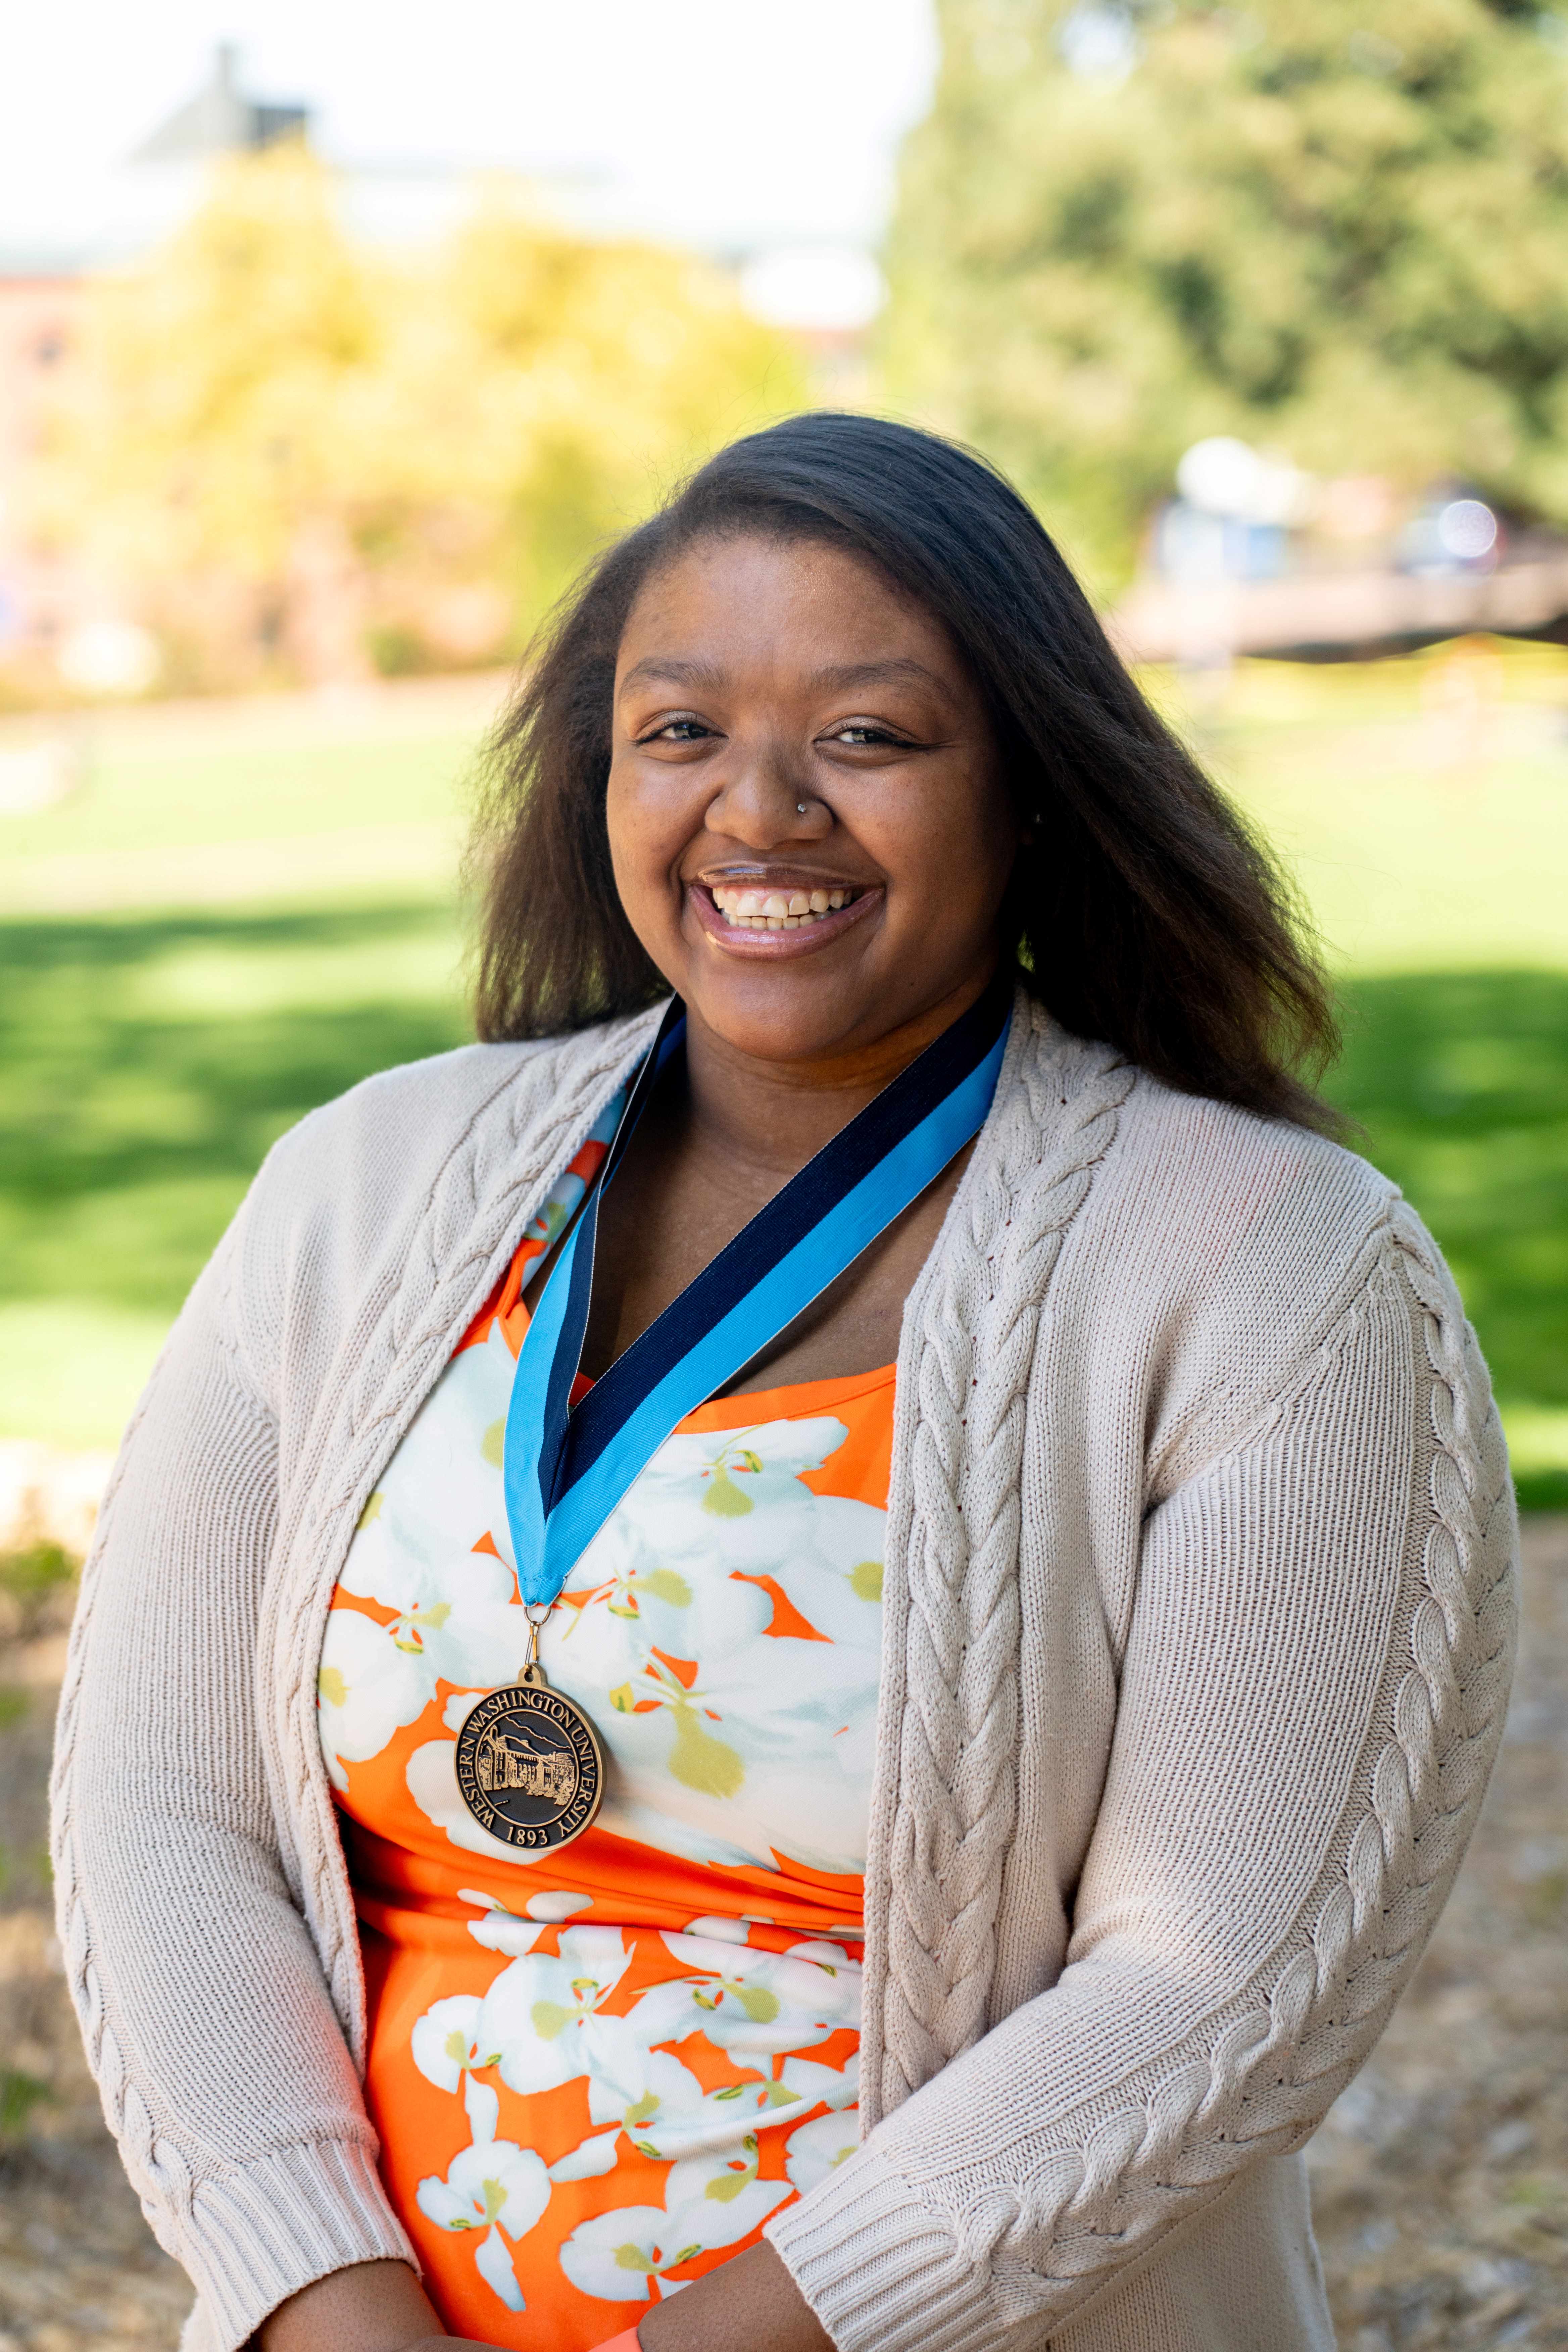 Nia Gipson in front of Old Main wearing an orange floral dress and WWU award medallion